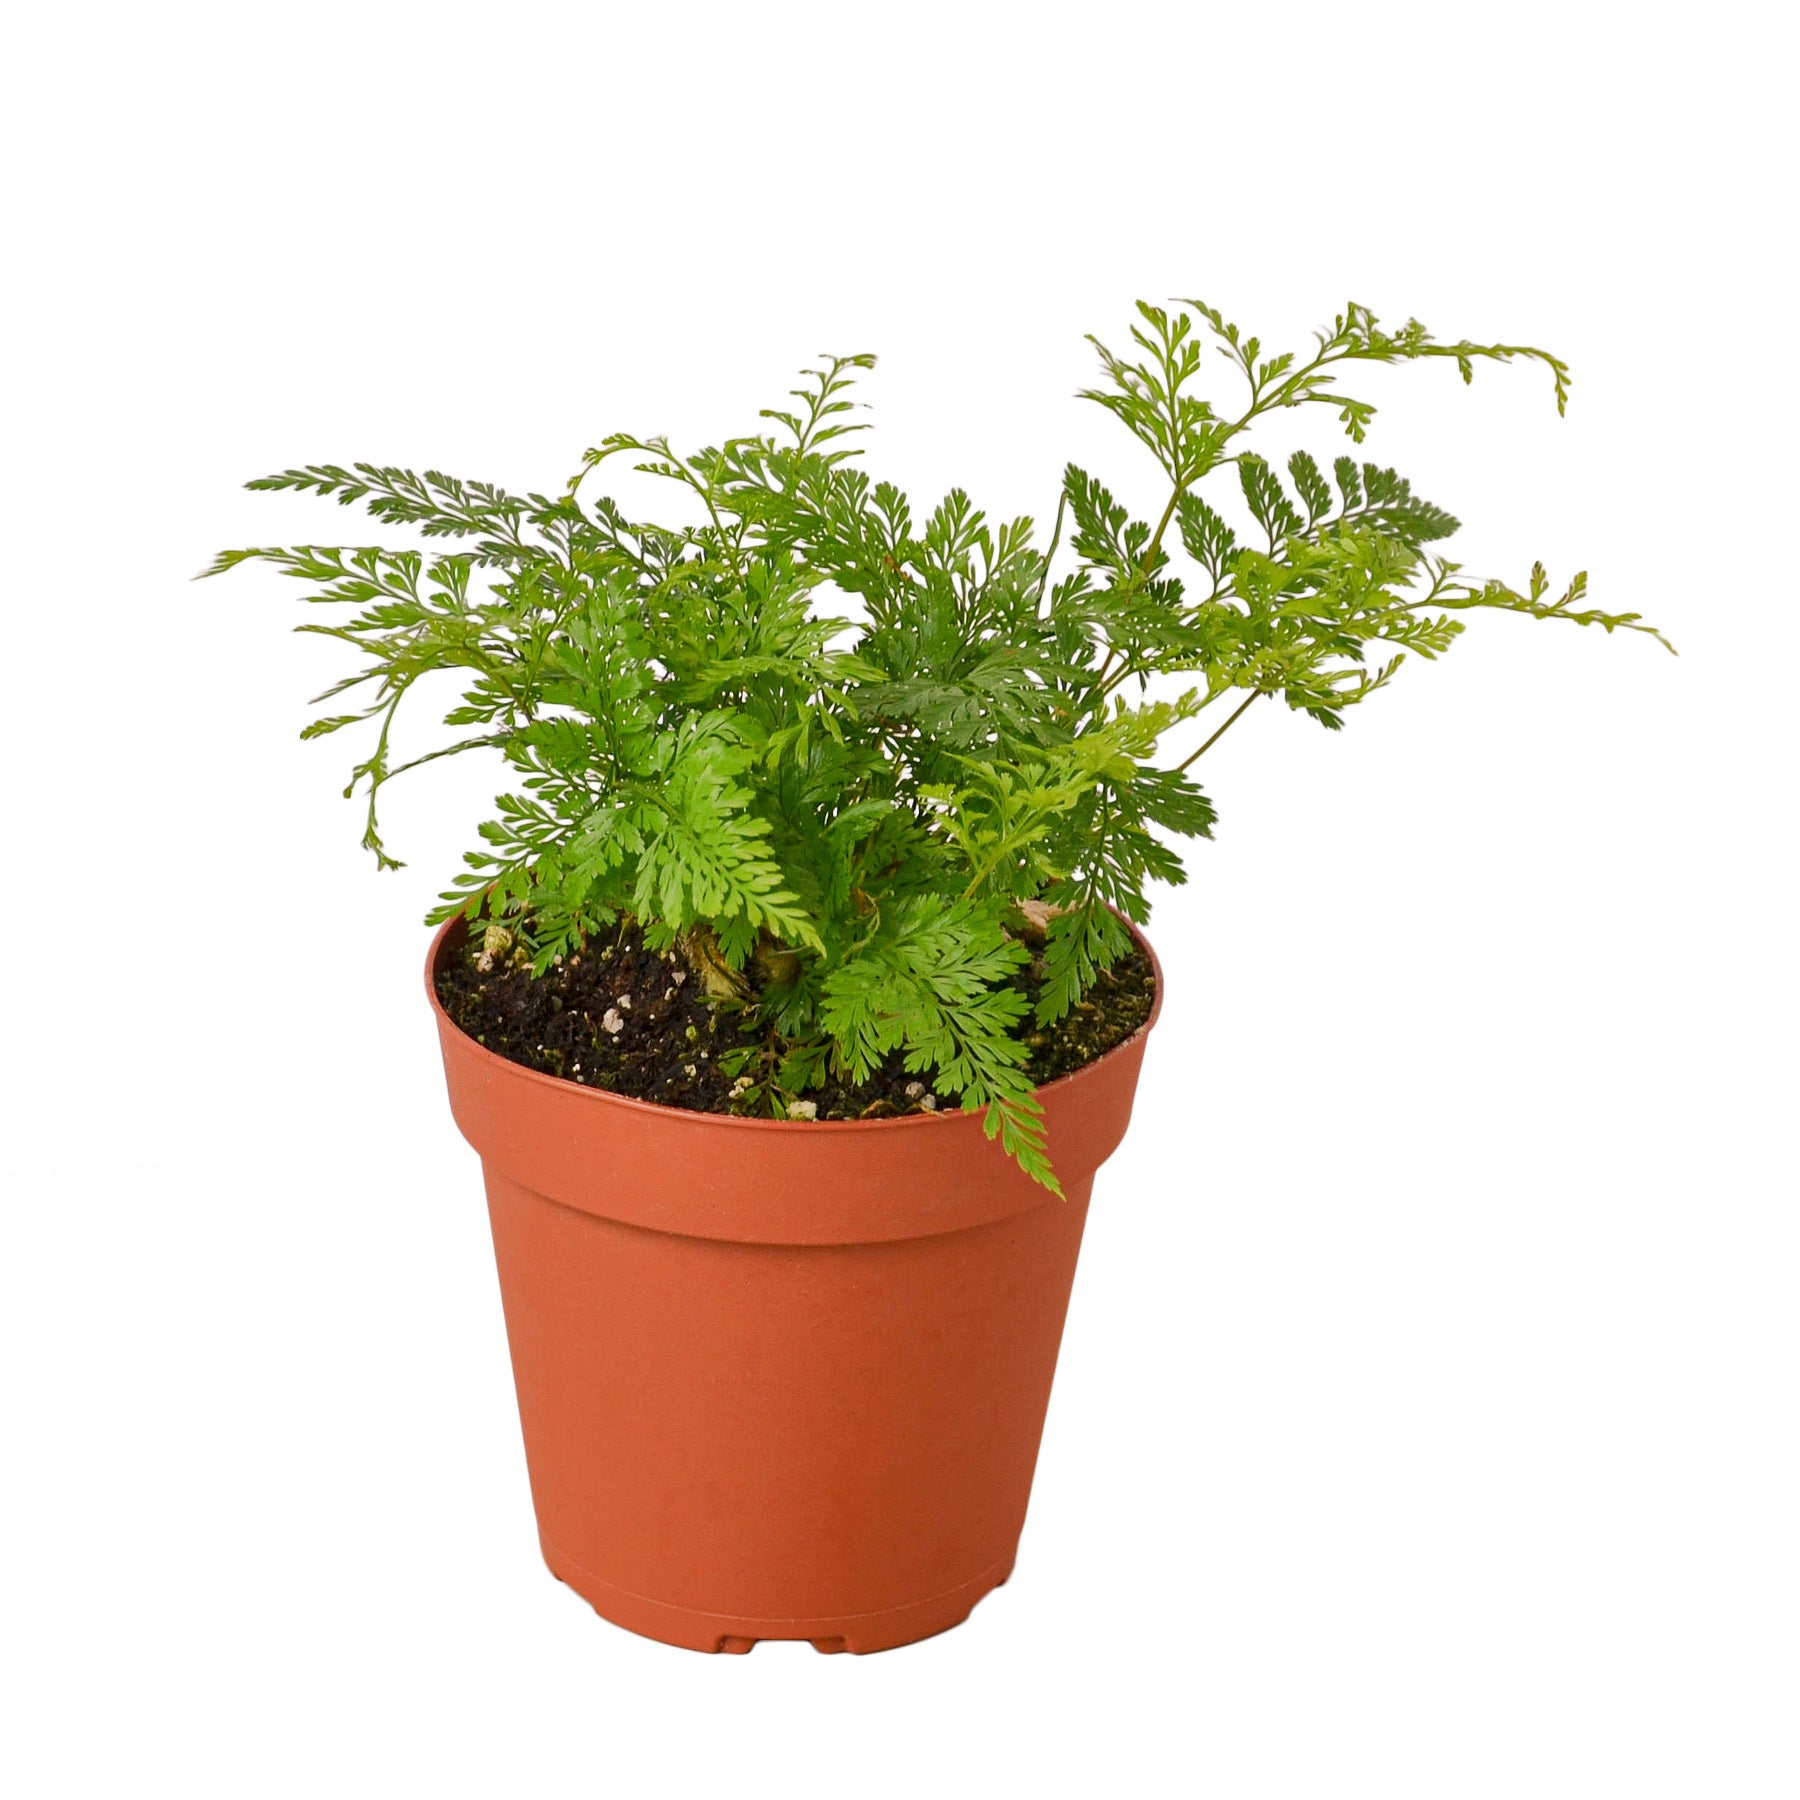 A small plant in a pot on a white background found at a nearby garden center.